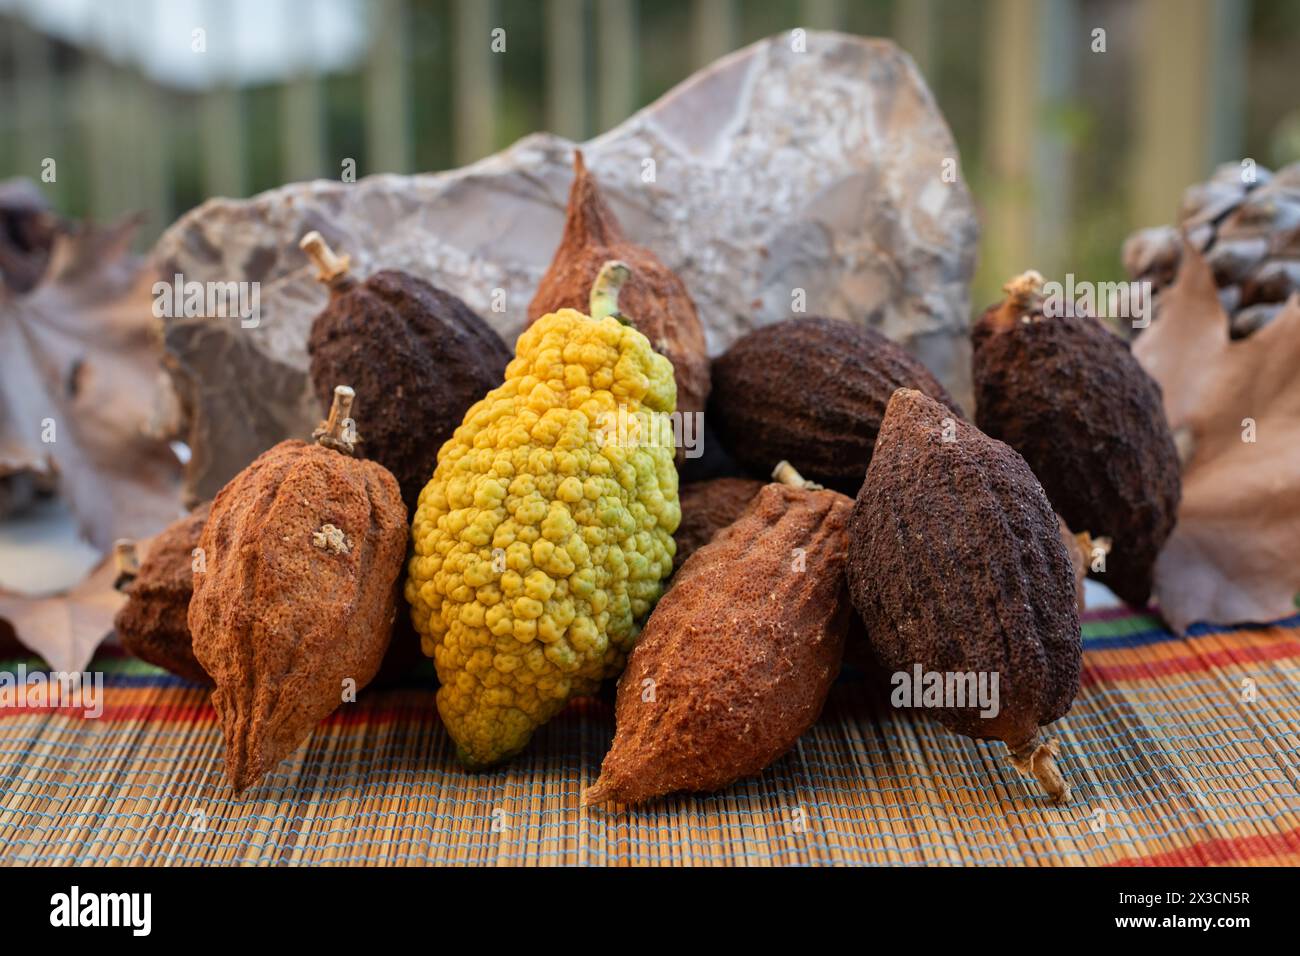 Still life image of a mature, yellow kosher etrog, used in the ritual celebration of the Jewish holiday of Sukkot, alongside similar brown, dried citr Stock Photo